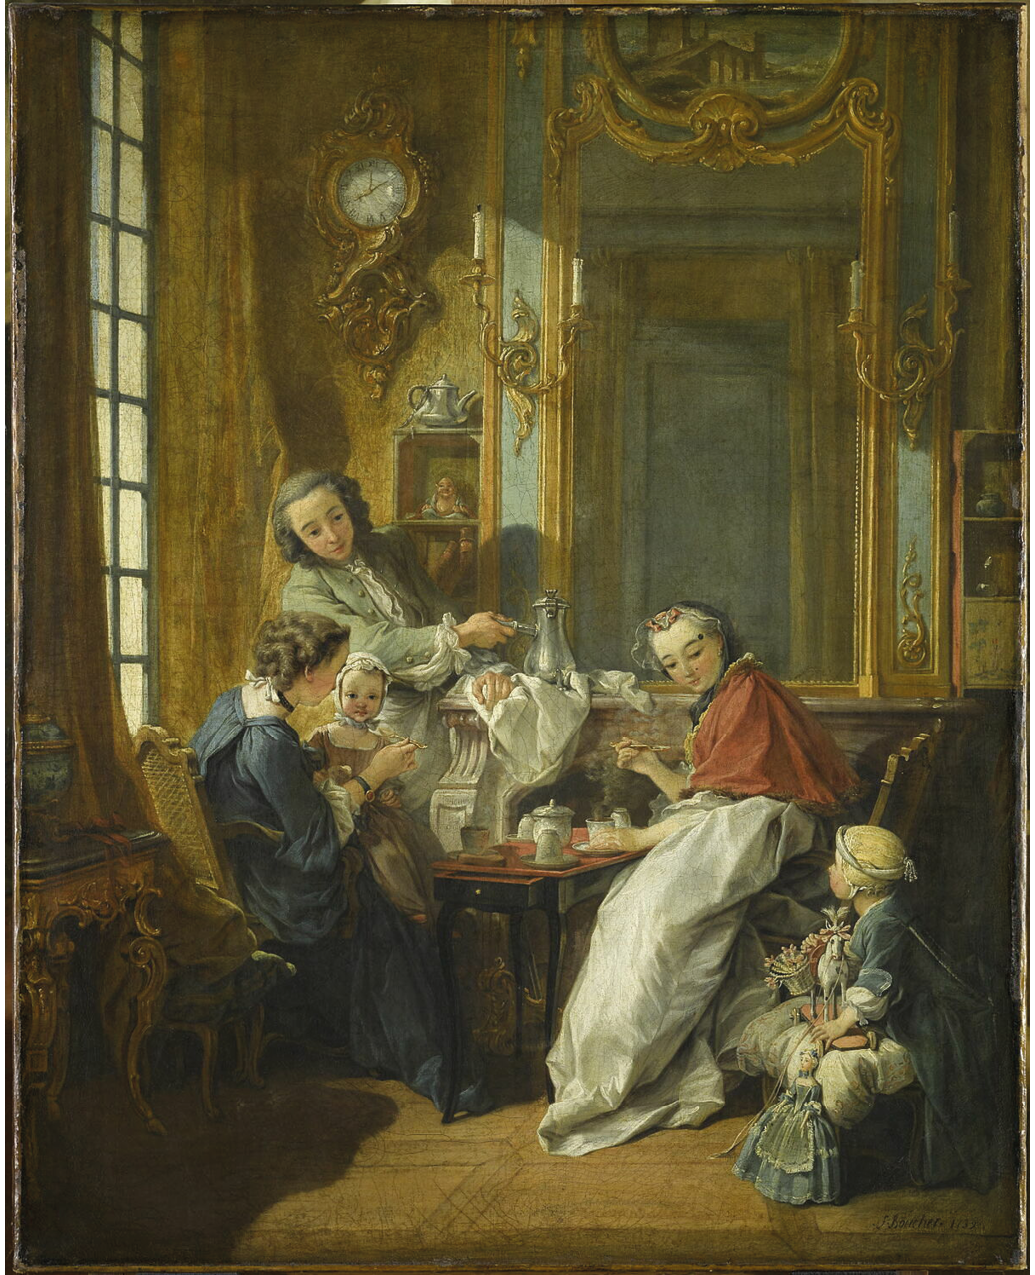 An oil painting from 1739; depicts a high-class French family having breakfast; the family sits around a table with food; it includes a man holding a pot as he looks at the young girl sitting in the floor holding her toys while looking back at him, an older woman spoon-feeding a young girl, and a younger woman sitting across the older one holding a spoon while looking at the younger girl on the floor; the room itself includes a large gilded mirror, a wall clock, a table with twisted legs, and two shelves with ornate figures.